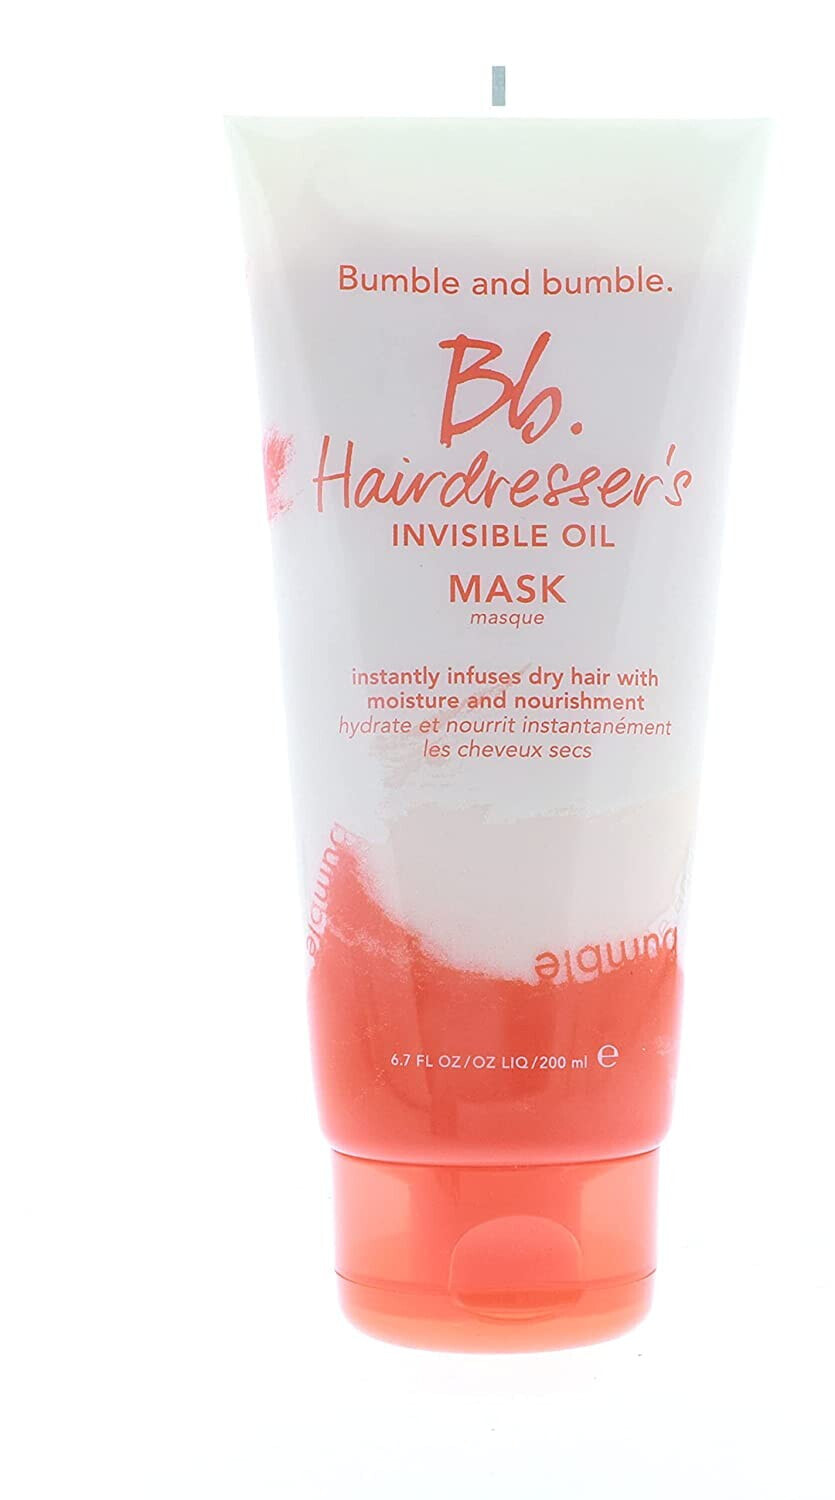 Bumble and Bumble Hairdresser's Invisible Oil Mask Питательная маска для сухих волос 200 мл